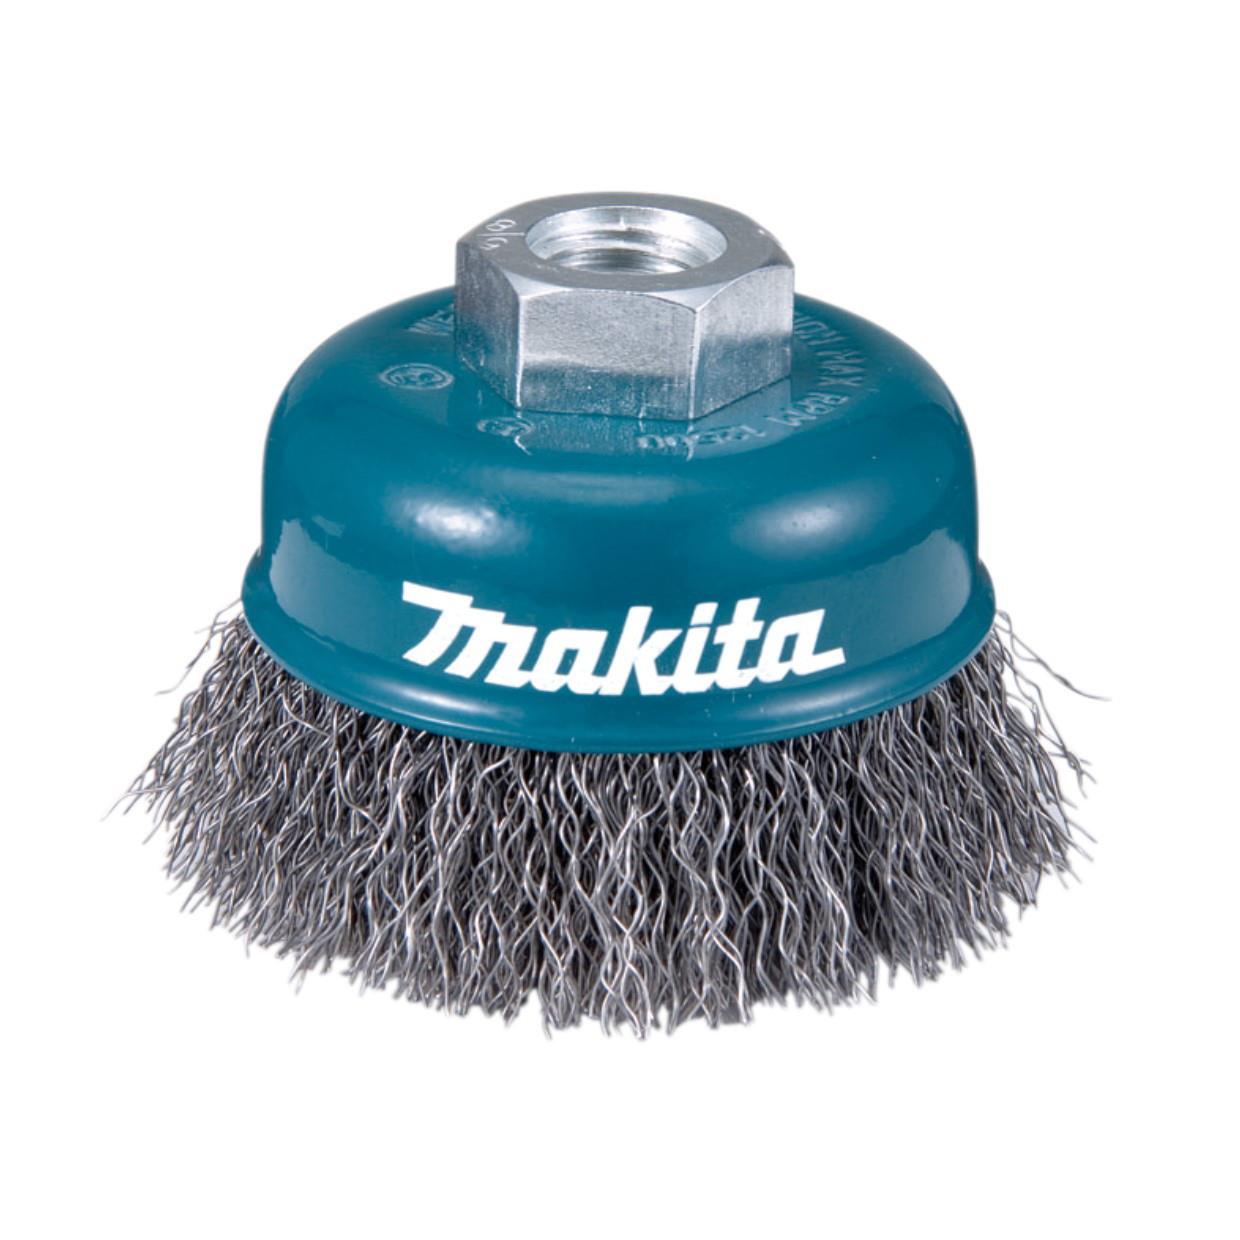 Makita D-24072 Crimp Wire Cup Brush; For Angle Grinder; 60mm Diameter; M14 x 2 Spindle Thread